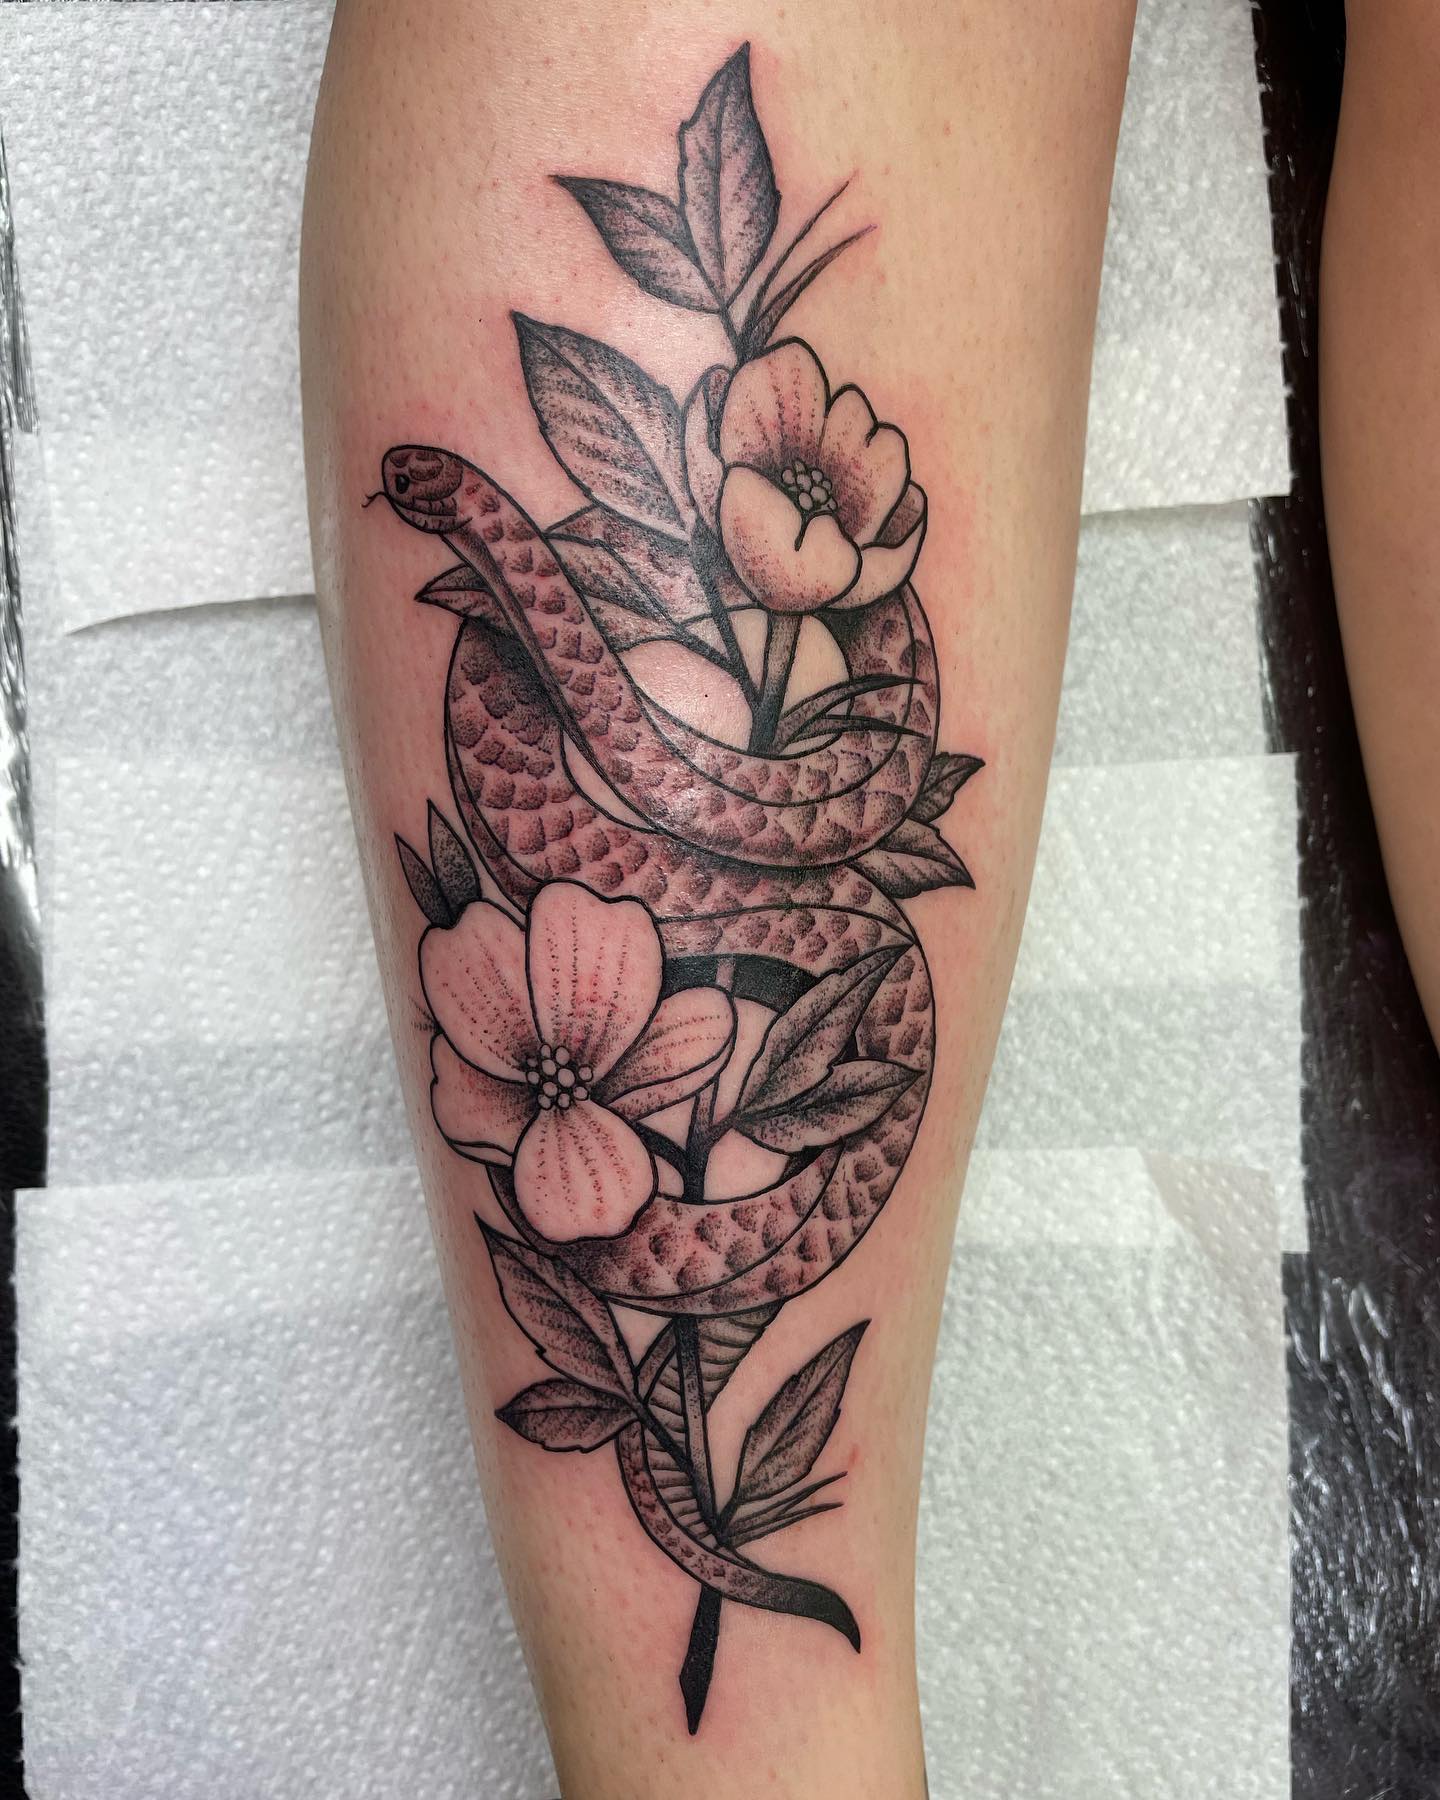 Snake and flowers for Emma from a while ago- thank you! Done studioxiiigallery🙌
                   